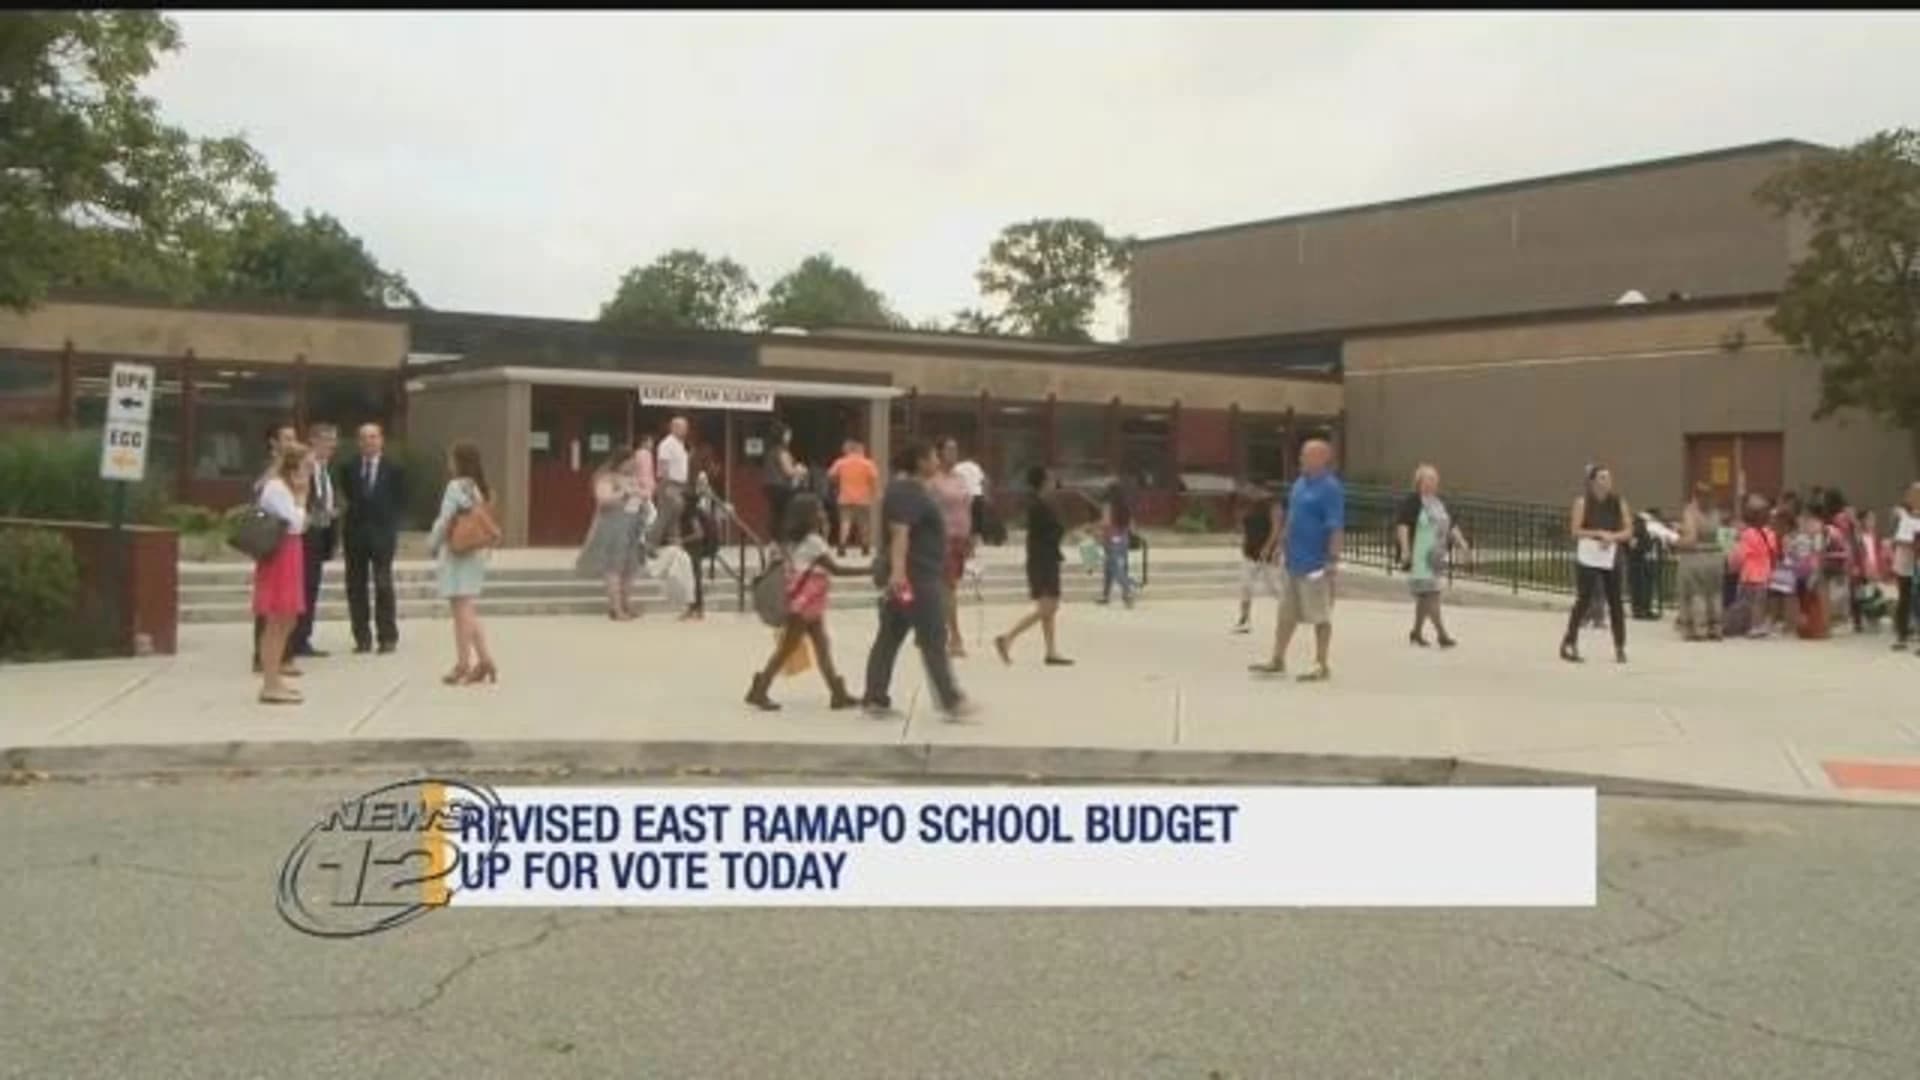 East Ramapo's school budget up for vote